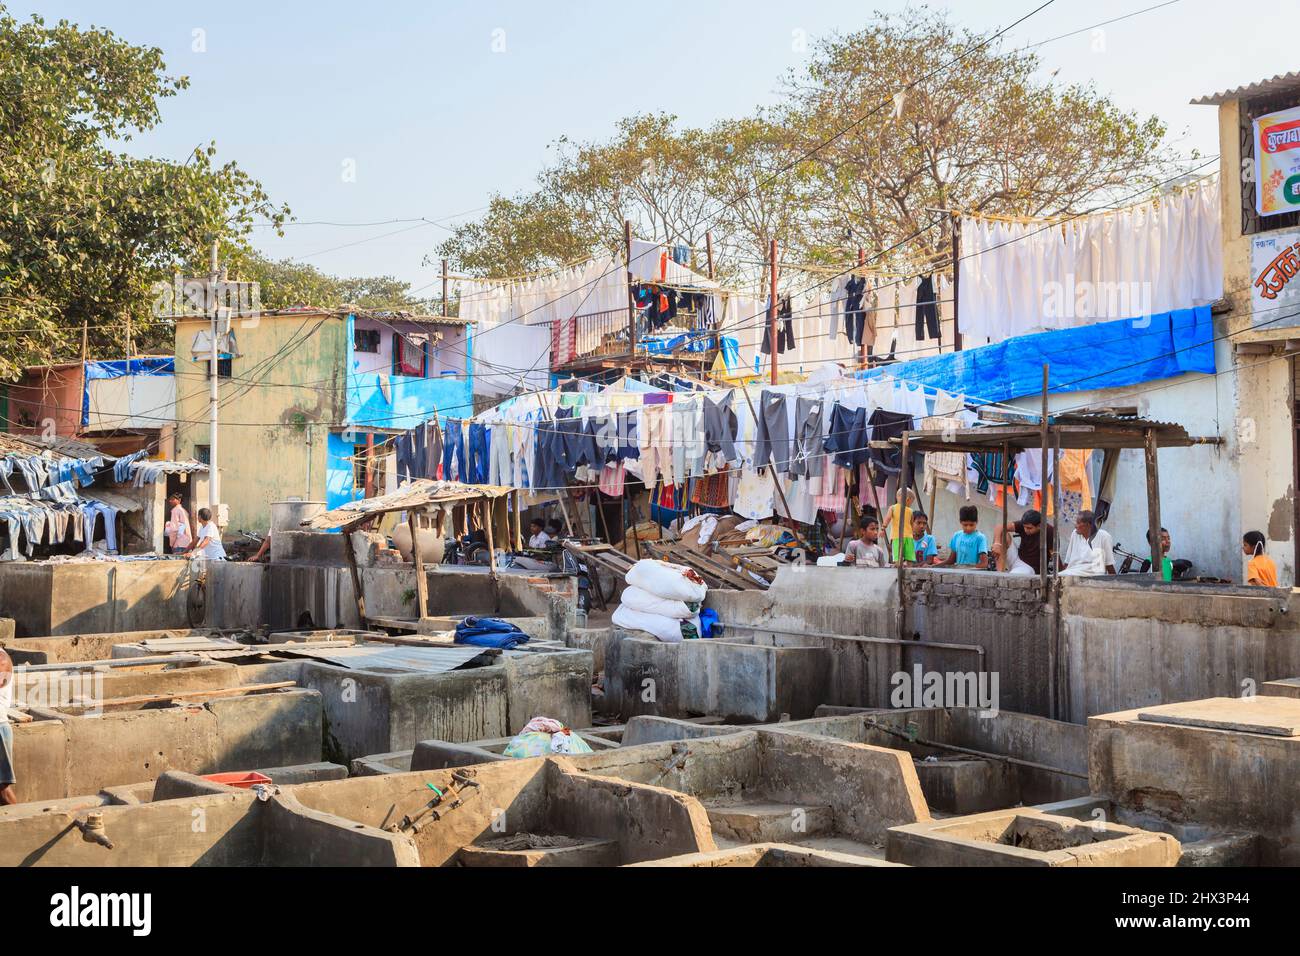 View of concrete wash pens and drying clothes at Mahalaxmi Dhobi Ghat, a large open air laundromat in Mumbai, India Stock Photo